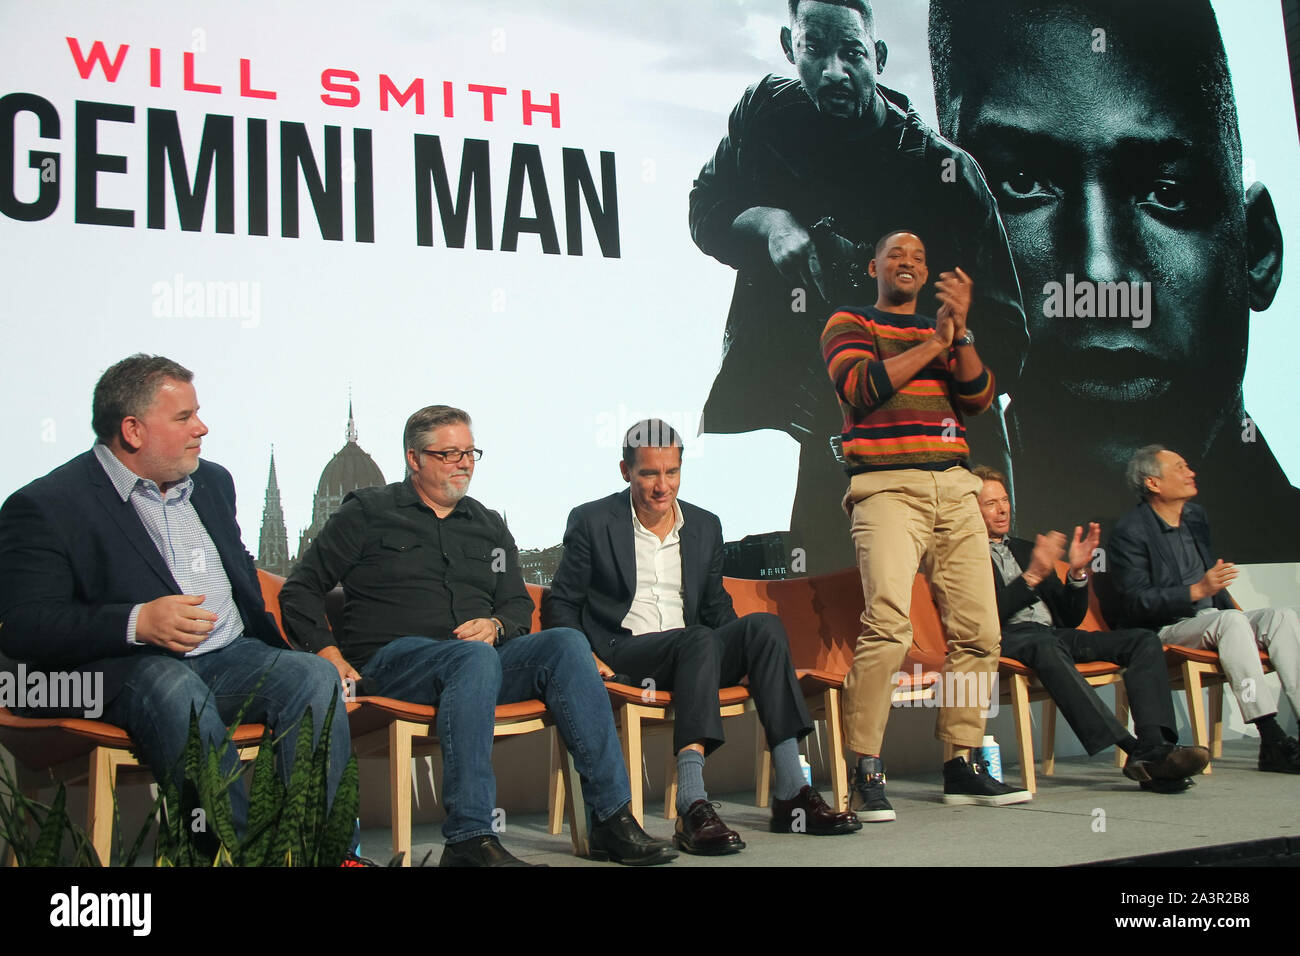 Guy Williams, Bill Westenhofer, Clive Owen, Will Smith, Jerry Bruckheimer, Ang Lee  10/04/2019 'Gemini Man' Press Conference held at the YouTube Space in Los Angeles, CA. Photo by I. Hasegawa / HNW/ PictureLux Stock Photo